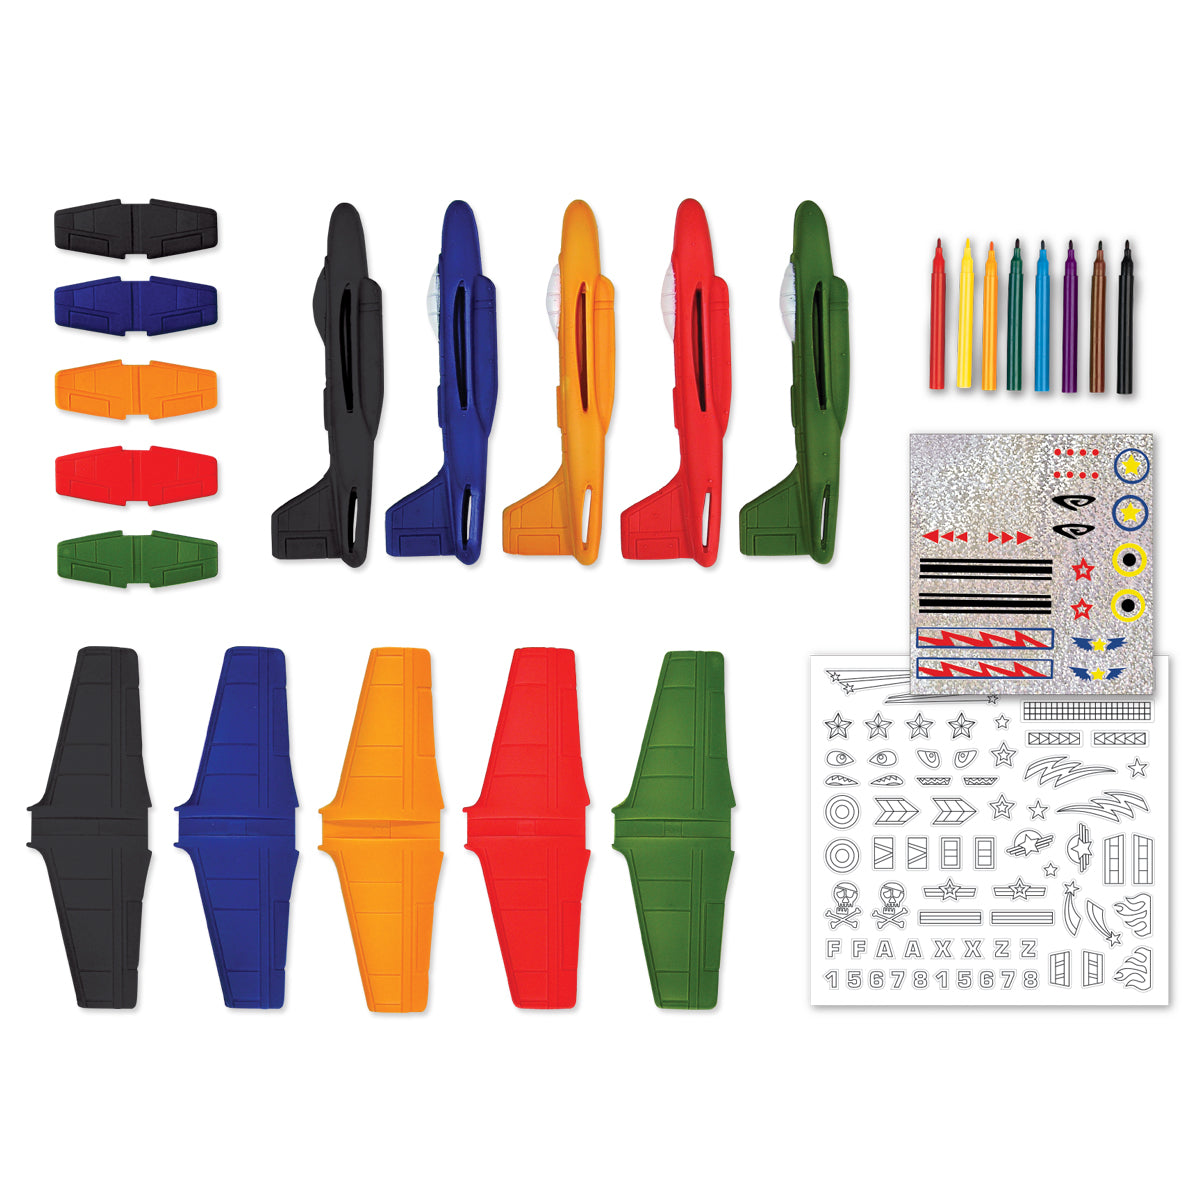 Components of Stunt Squadron kit from Faber Castell, comprising foam planes and stickers and marker pens